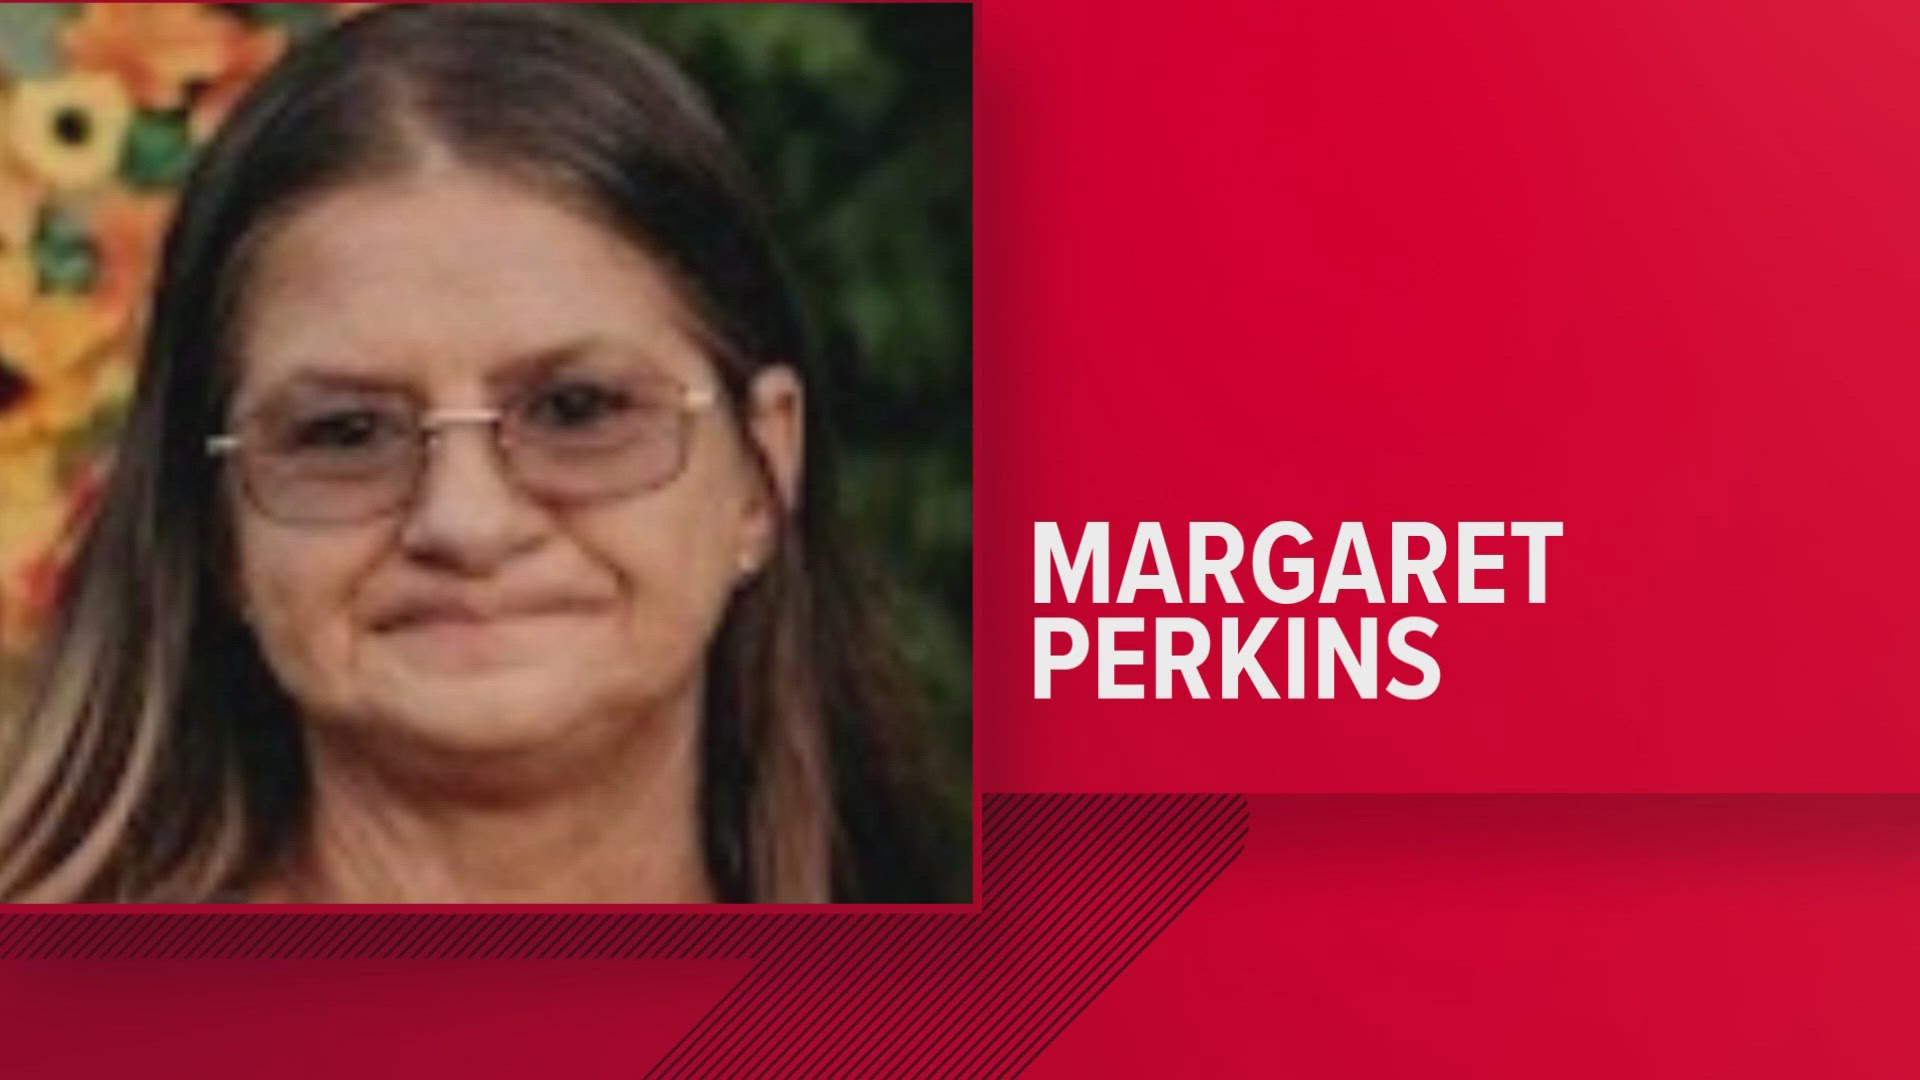 The Tennessee Bureau of Investigation said Margaret Perkins has a medical condition that could impair her ability to return home.